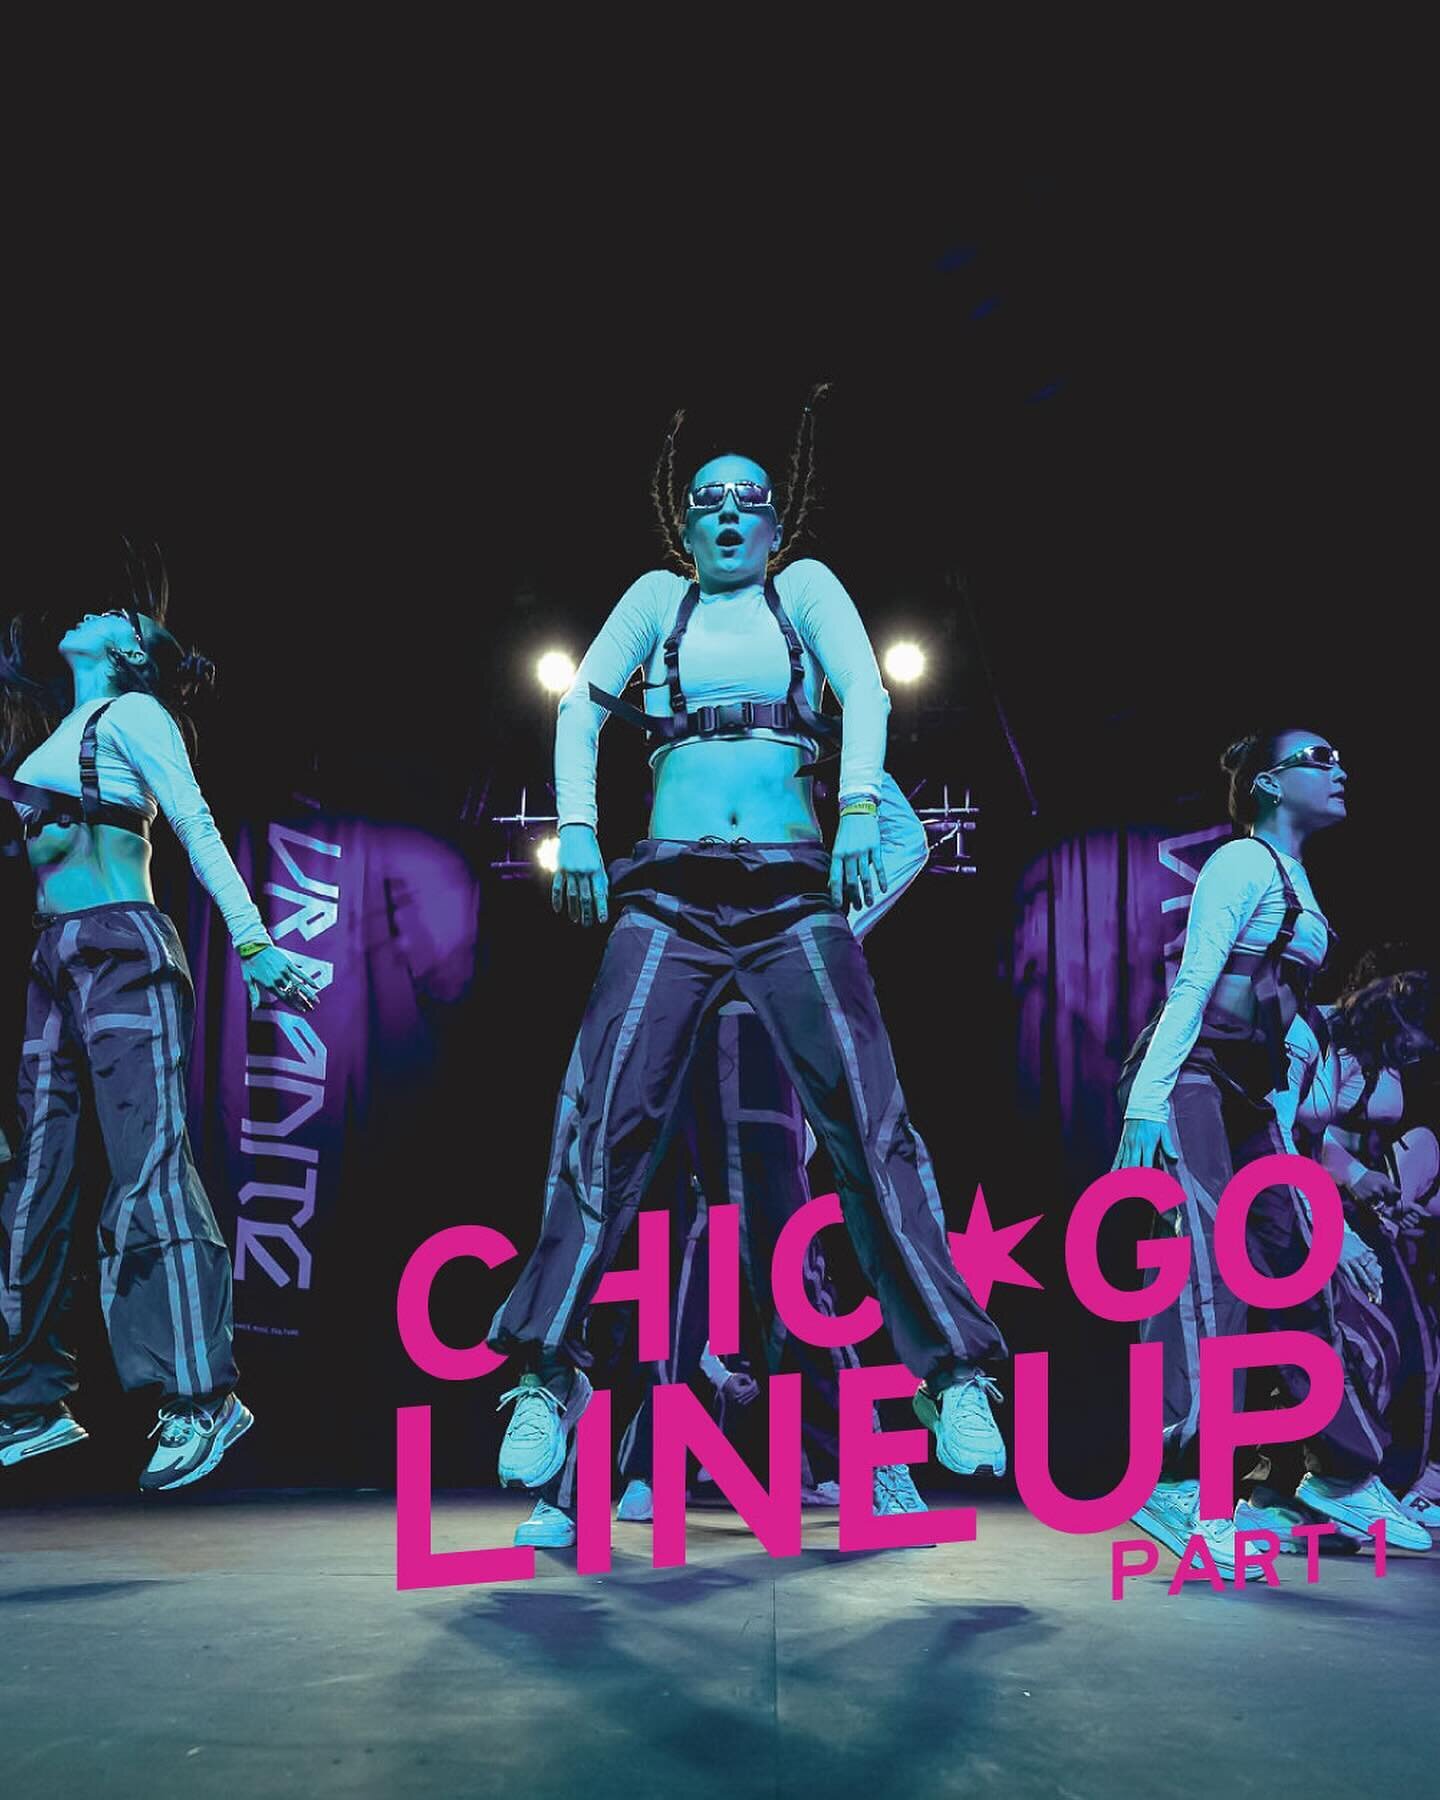 Ready for Chicago?? Let&rsquo;s MEET THE LINEUP (part 1)

Meet 6 of the 20 teams performing live on stage at @metrochicago on Sat April 6th&hellip;

1) Prism Kru @prismkru / Chicago / 1st Urbanite
2) Kay Project @kayquiballo / Chicago / 1st Urbanite
